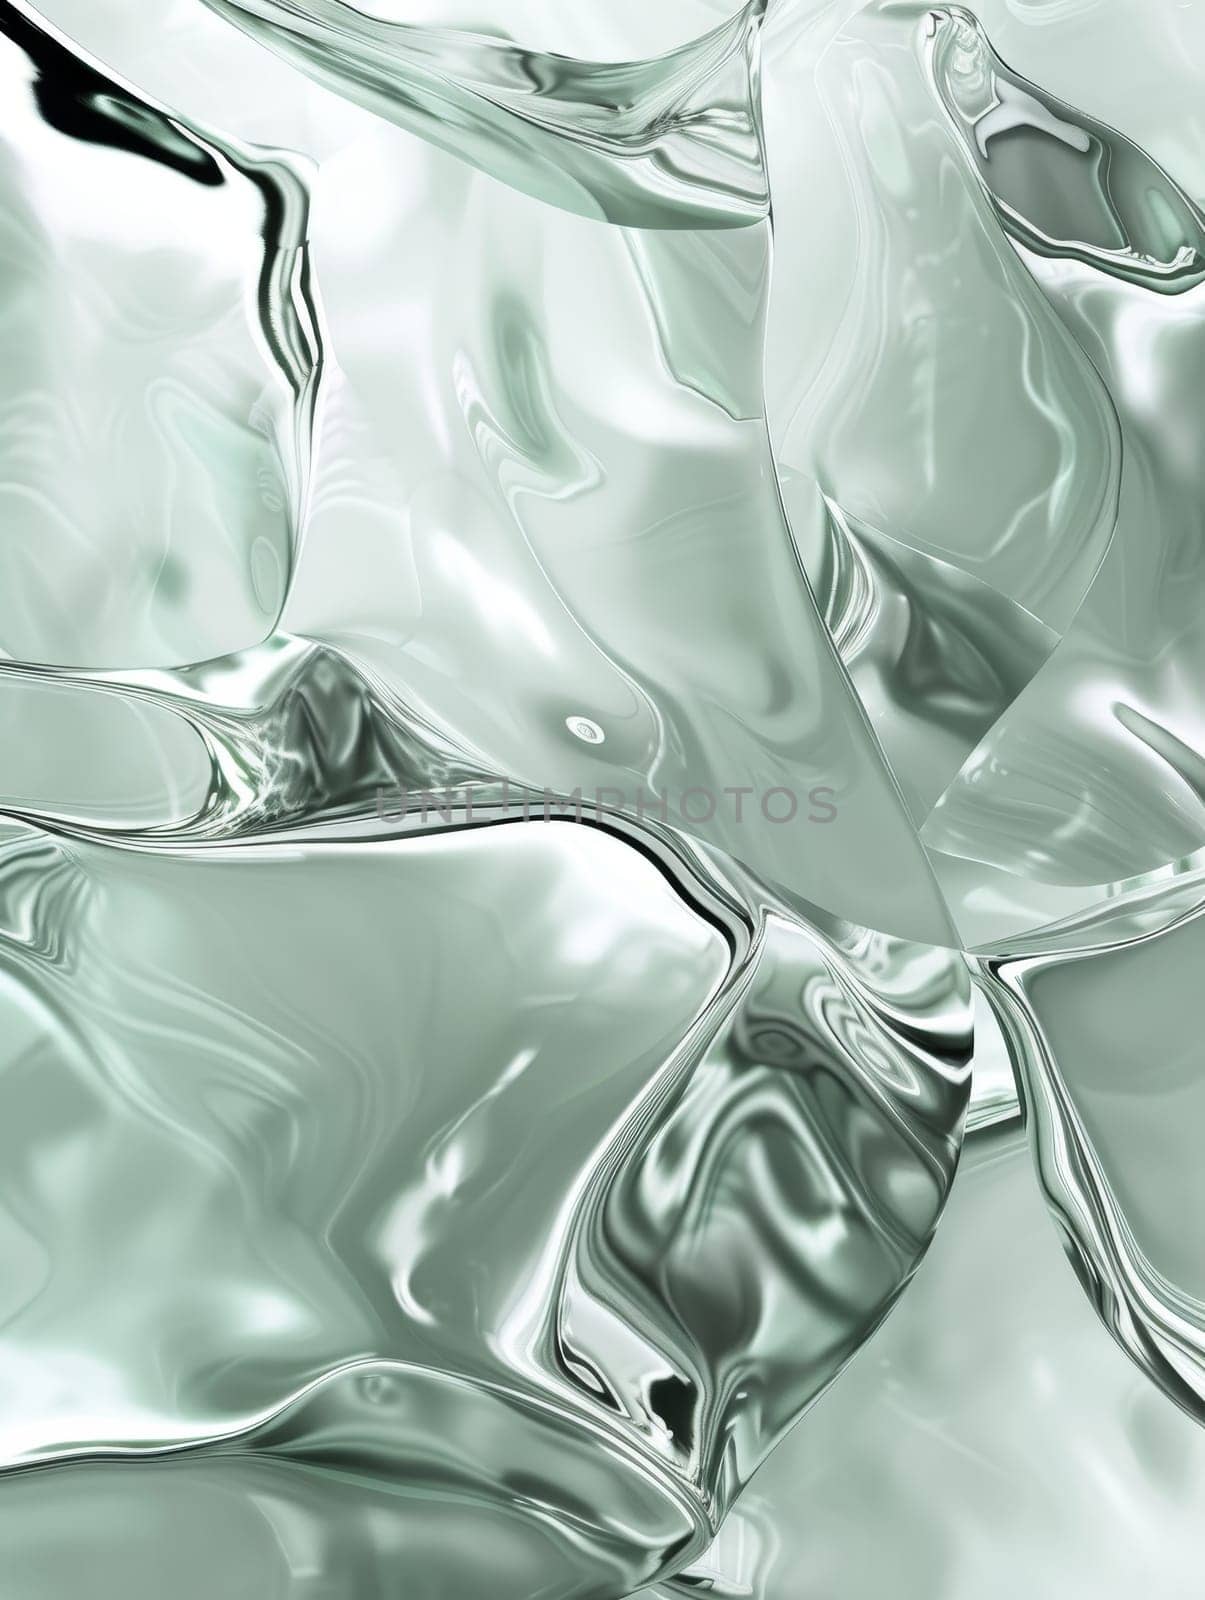 Digital abstract of liquid metal flow with a smooth, reflective, and wavy surface in tones of silver.